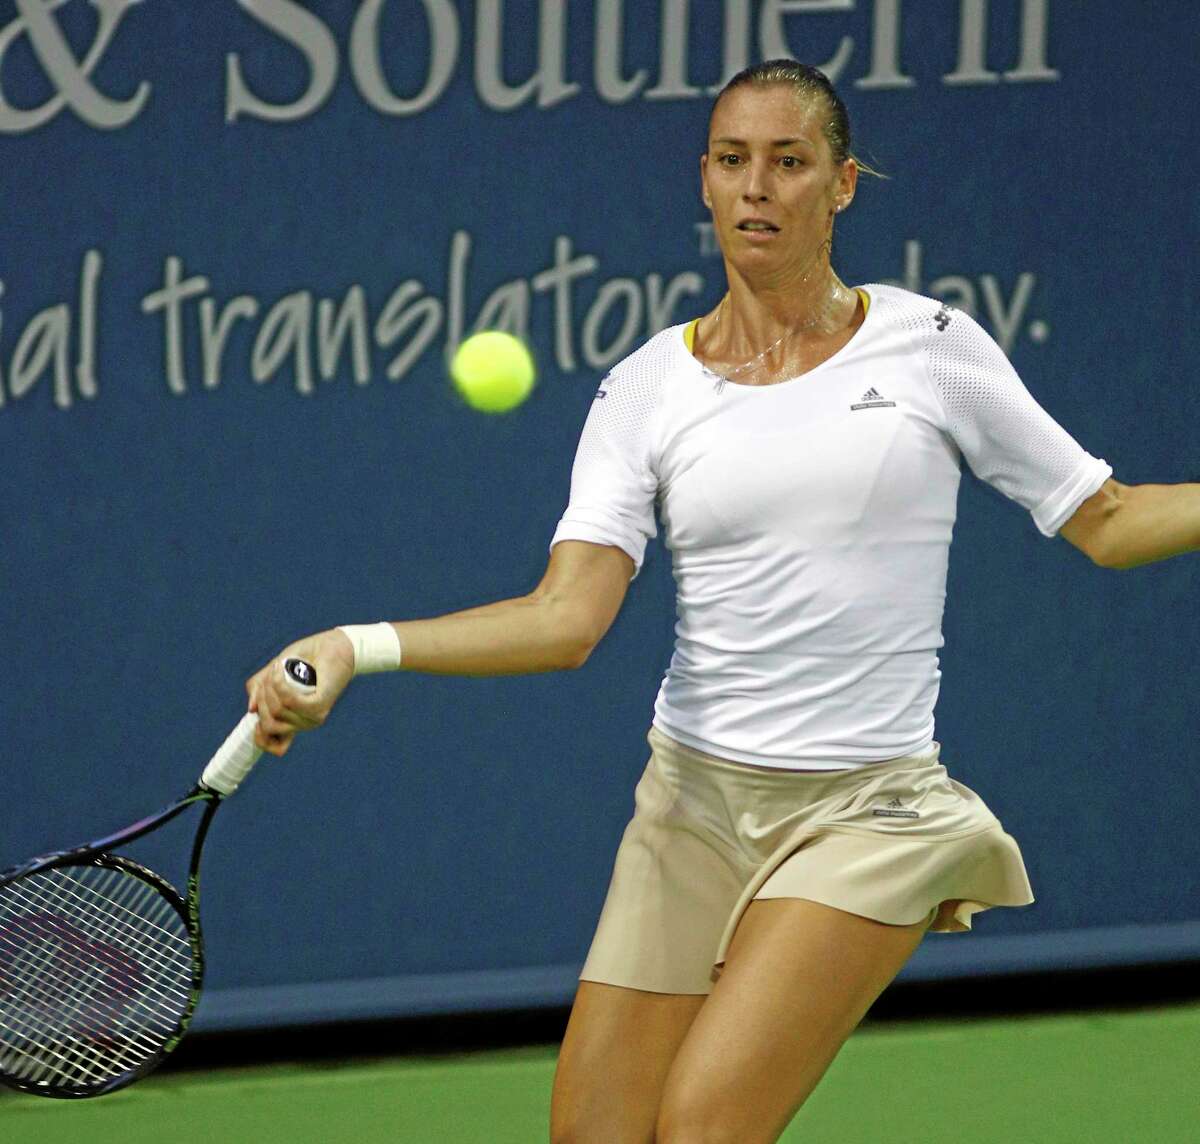 Flavia Pennetta pondered retirement before last year’s U.S. Open., but proceeded to advance to the semifinals.